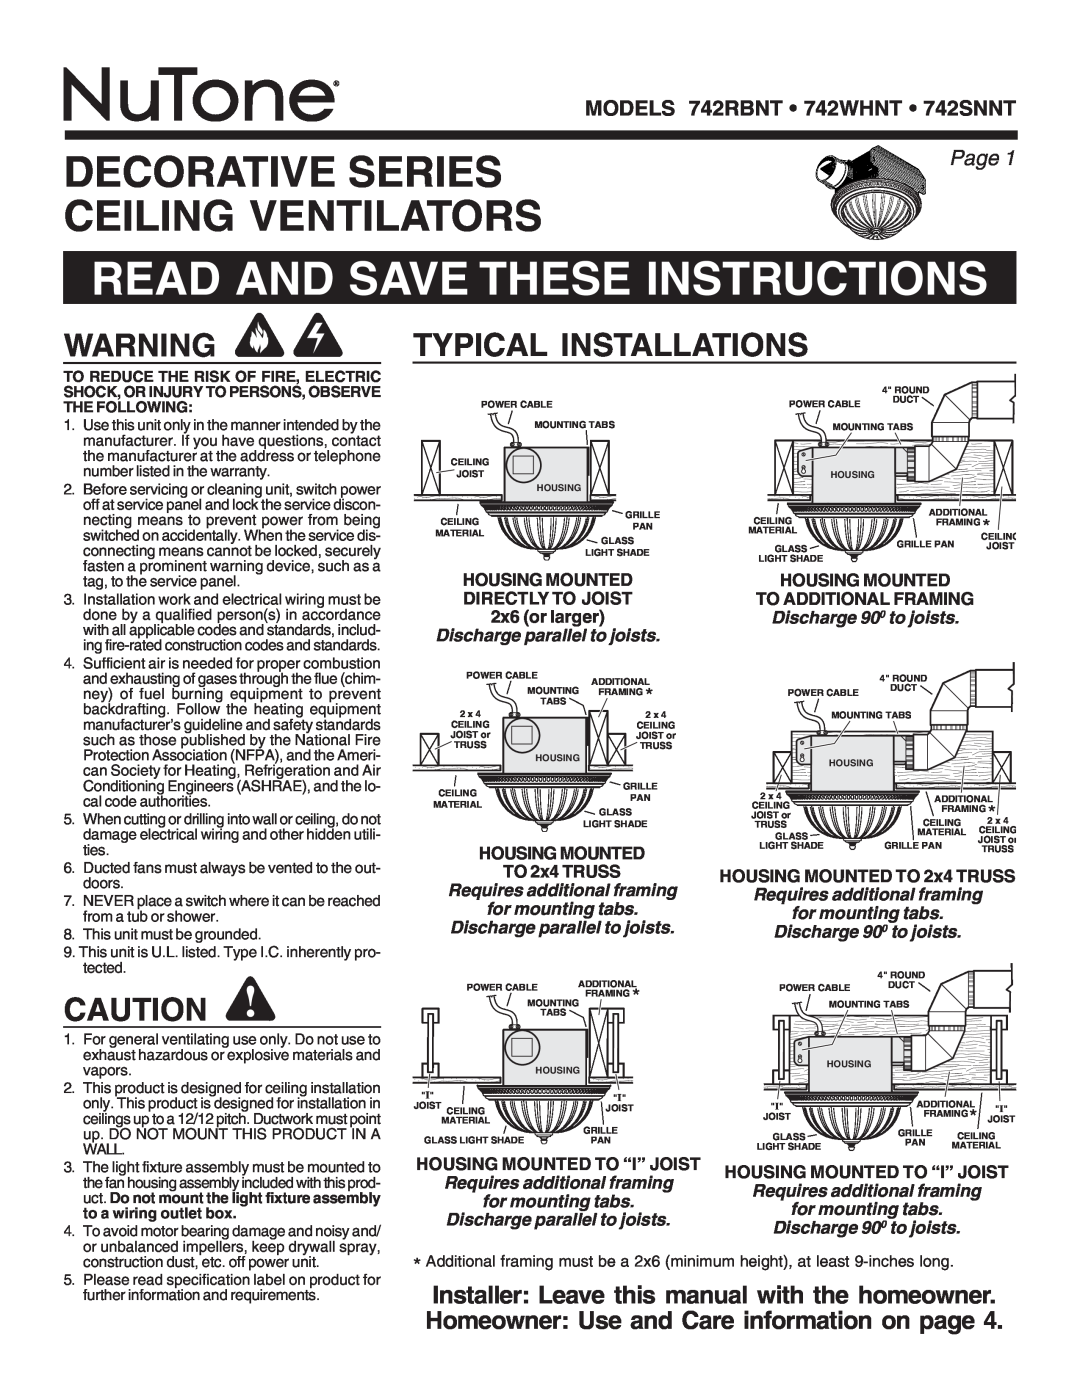 NuTone warranty Decorative Series Ceiling Ventilators, Typical Installations, MODELS 742RBNT 742WHNT 742SNNT, Page 